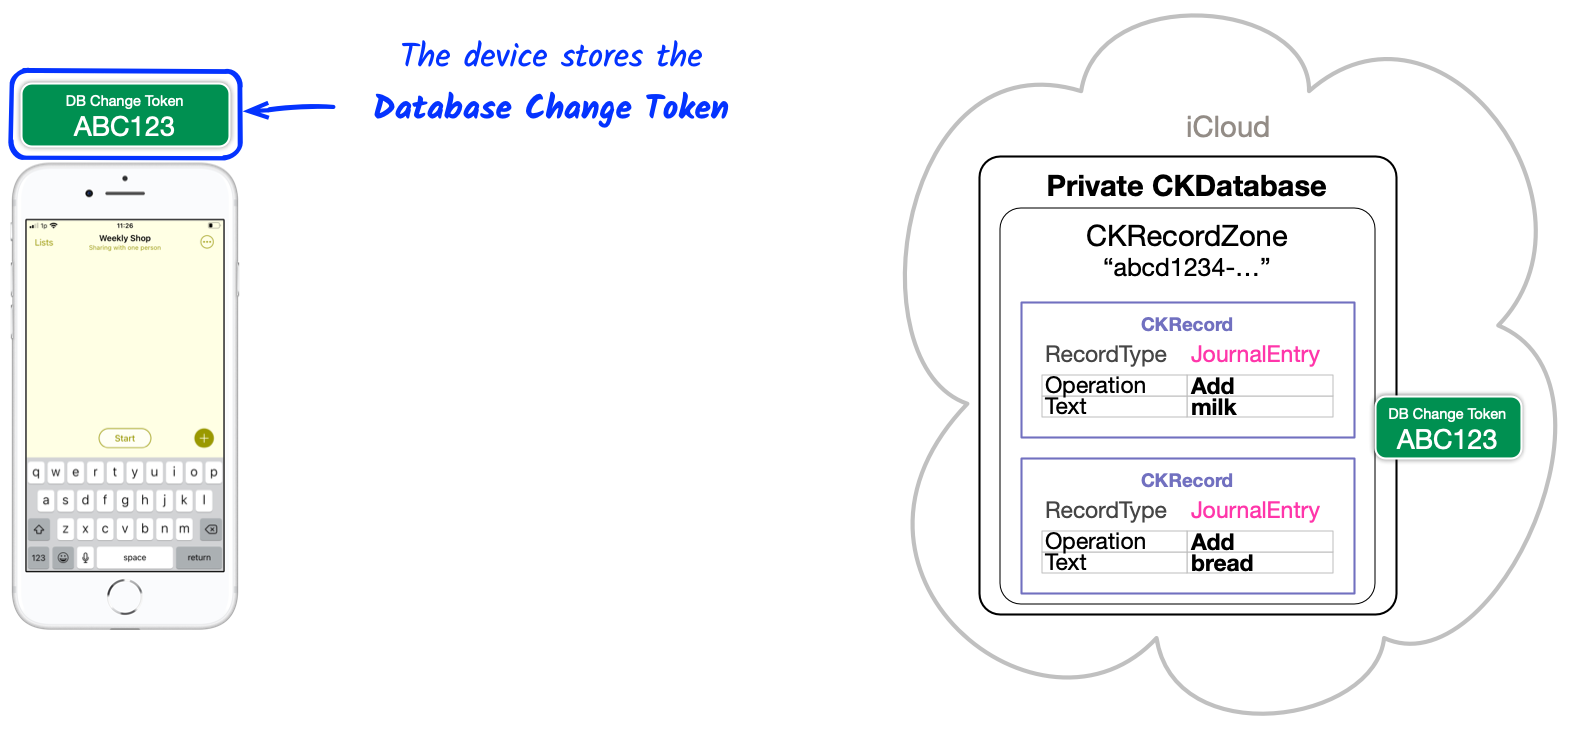 The app stores the database change token